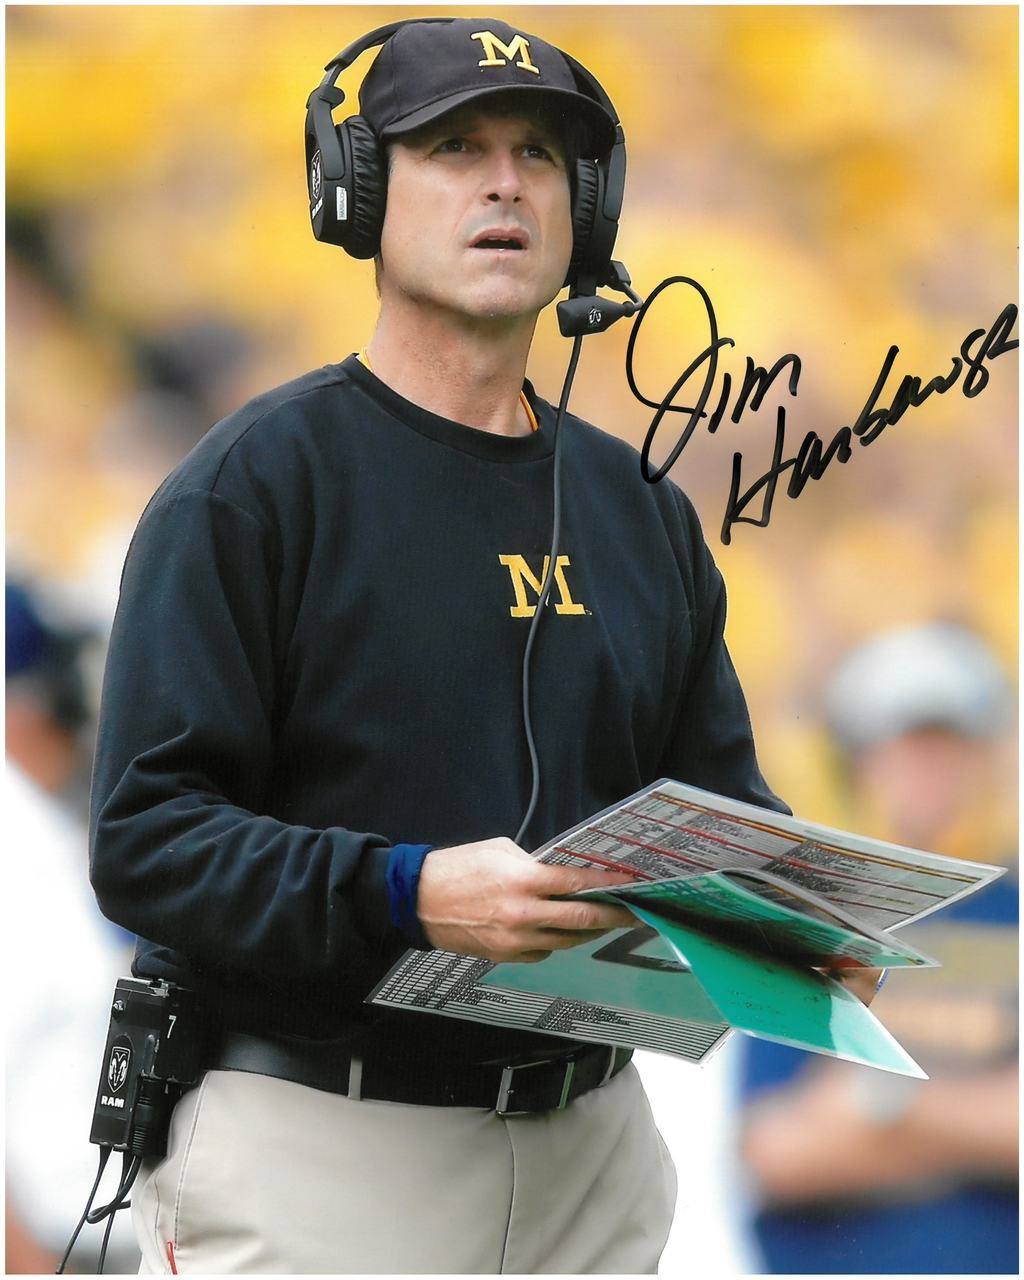 JIM HARBAUGH & JABRILL PEPPPERS SIGNED PHOTO 8X10 RP AUTO AUTOGRAPHED MICHIGAN 